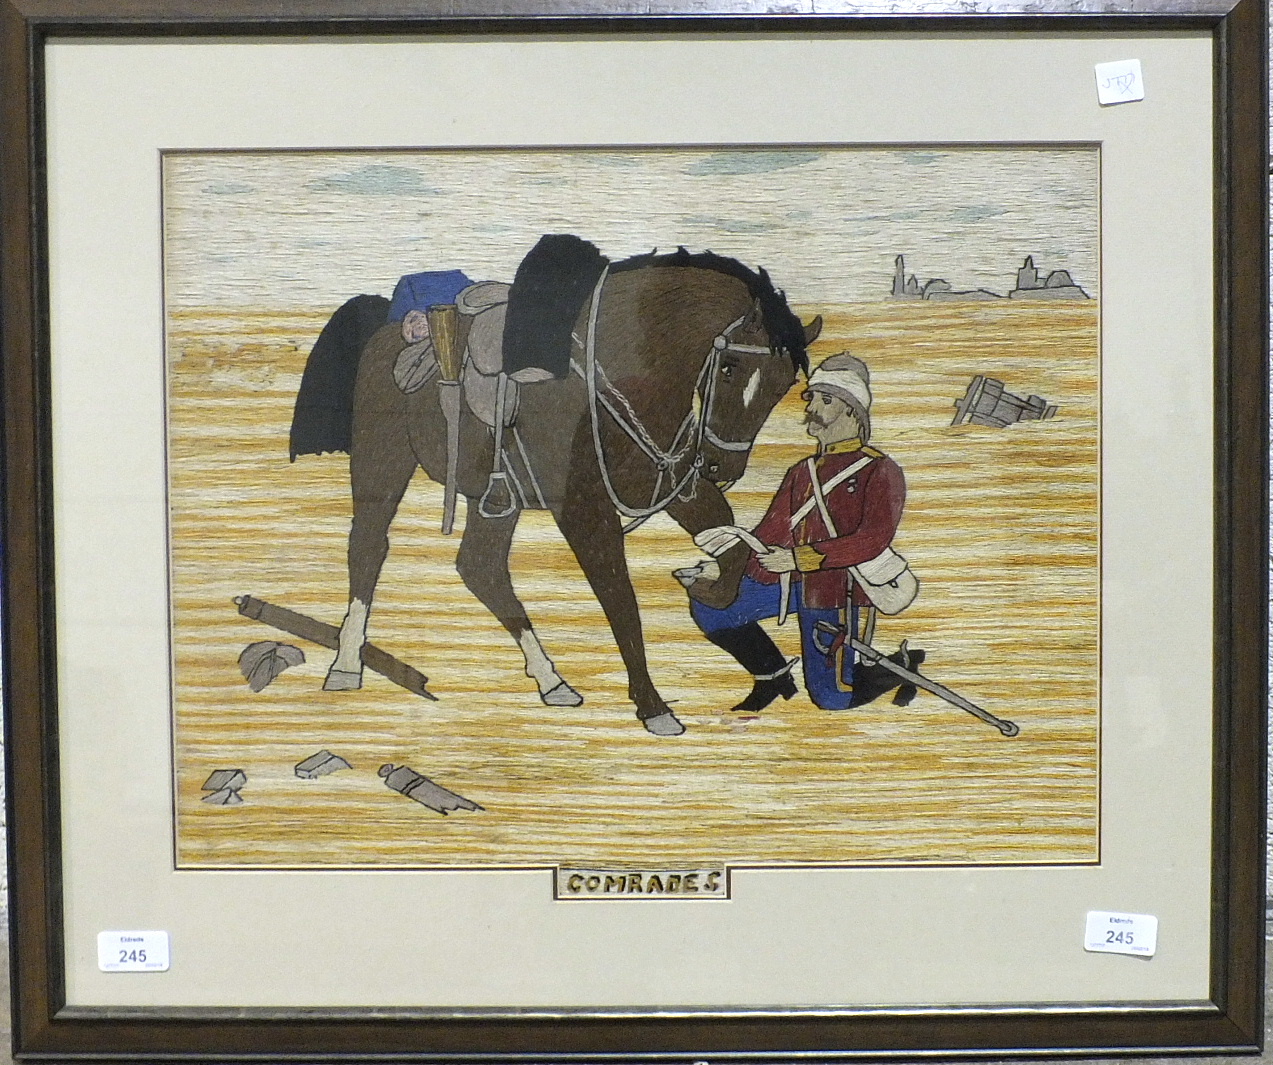 A Boer War wool work picture depicting a Dragoon tending his injured horse, titled 'Comrades',